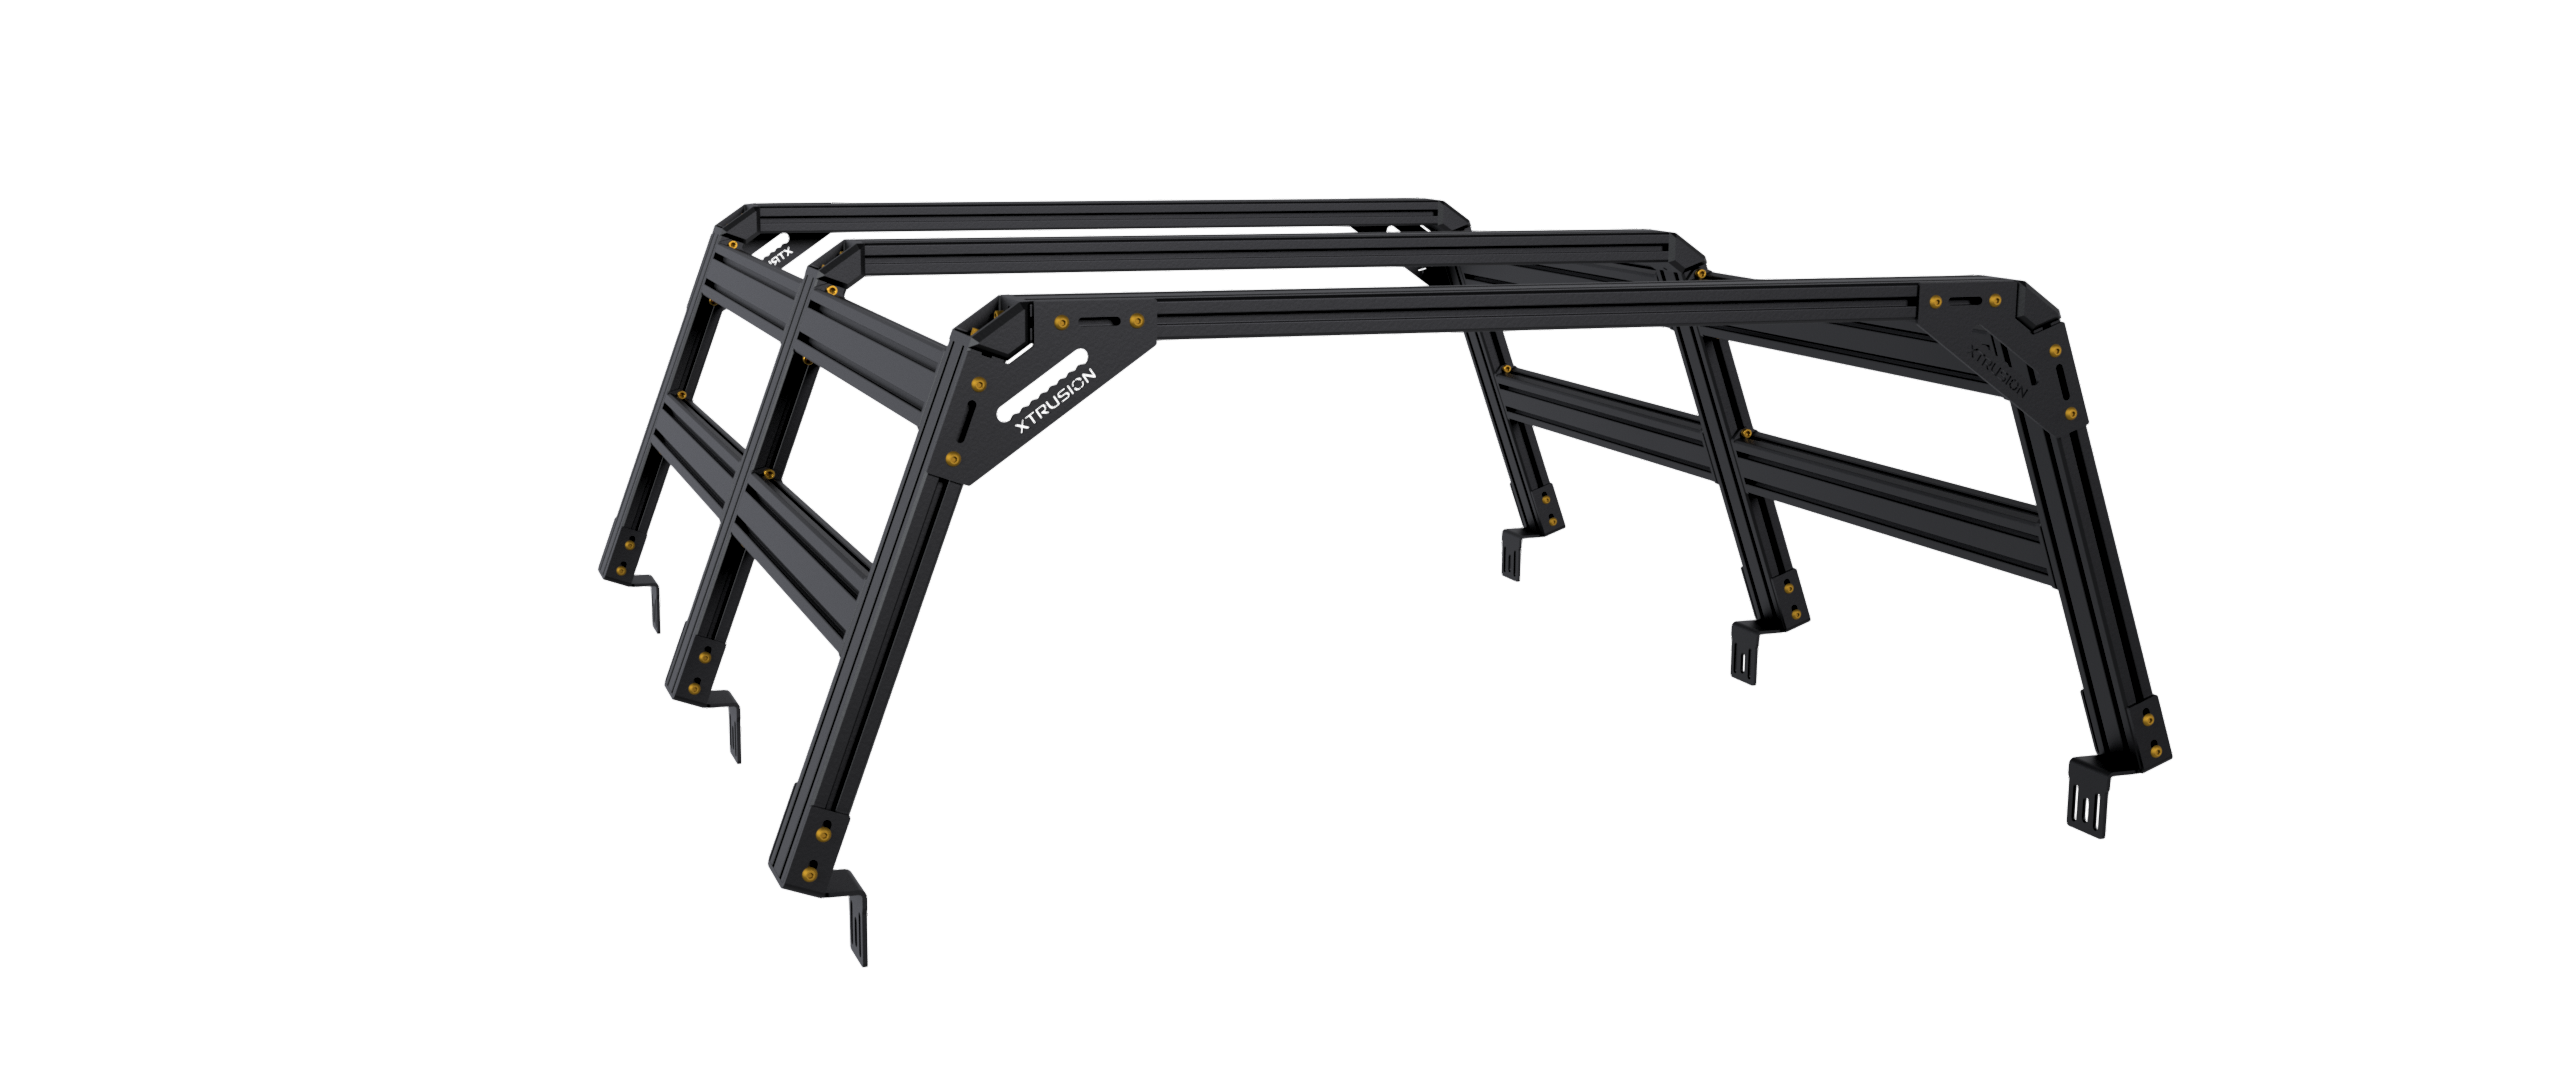 XTR3 Bed Rack for Ford F-250/350